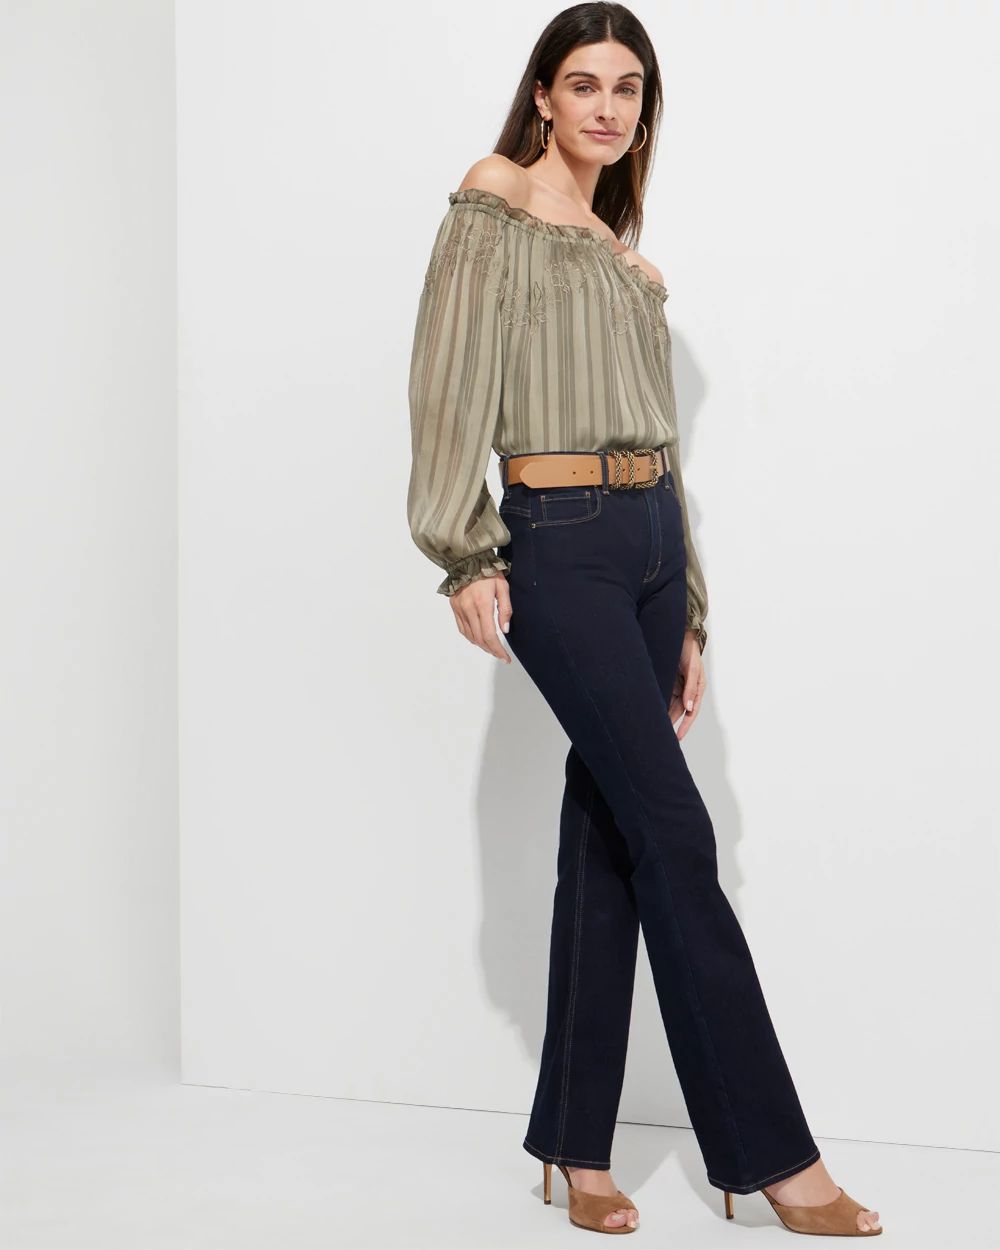 Outlet WHBM Embroidered Off-The-Shoulder Top click to view larger image.